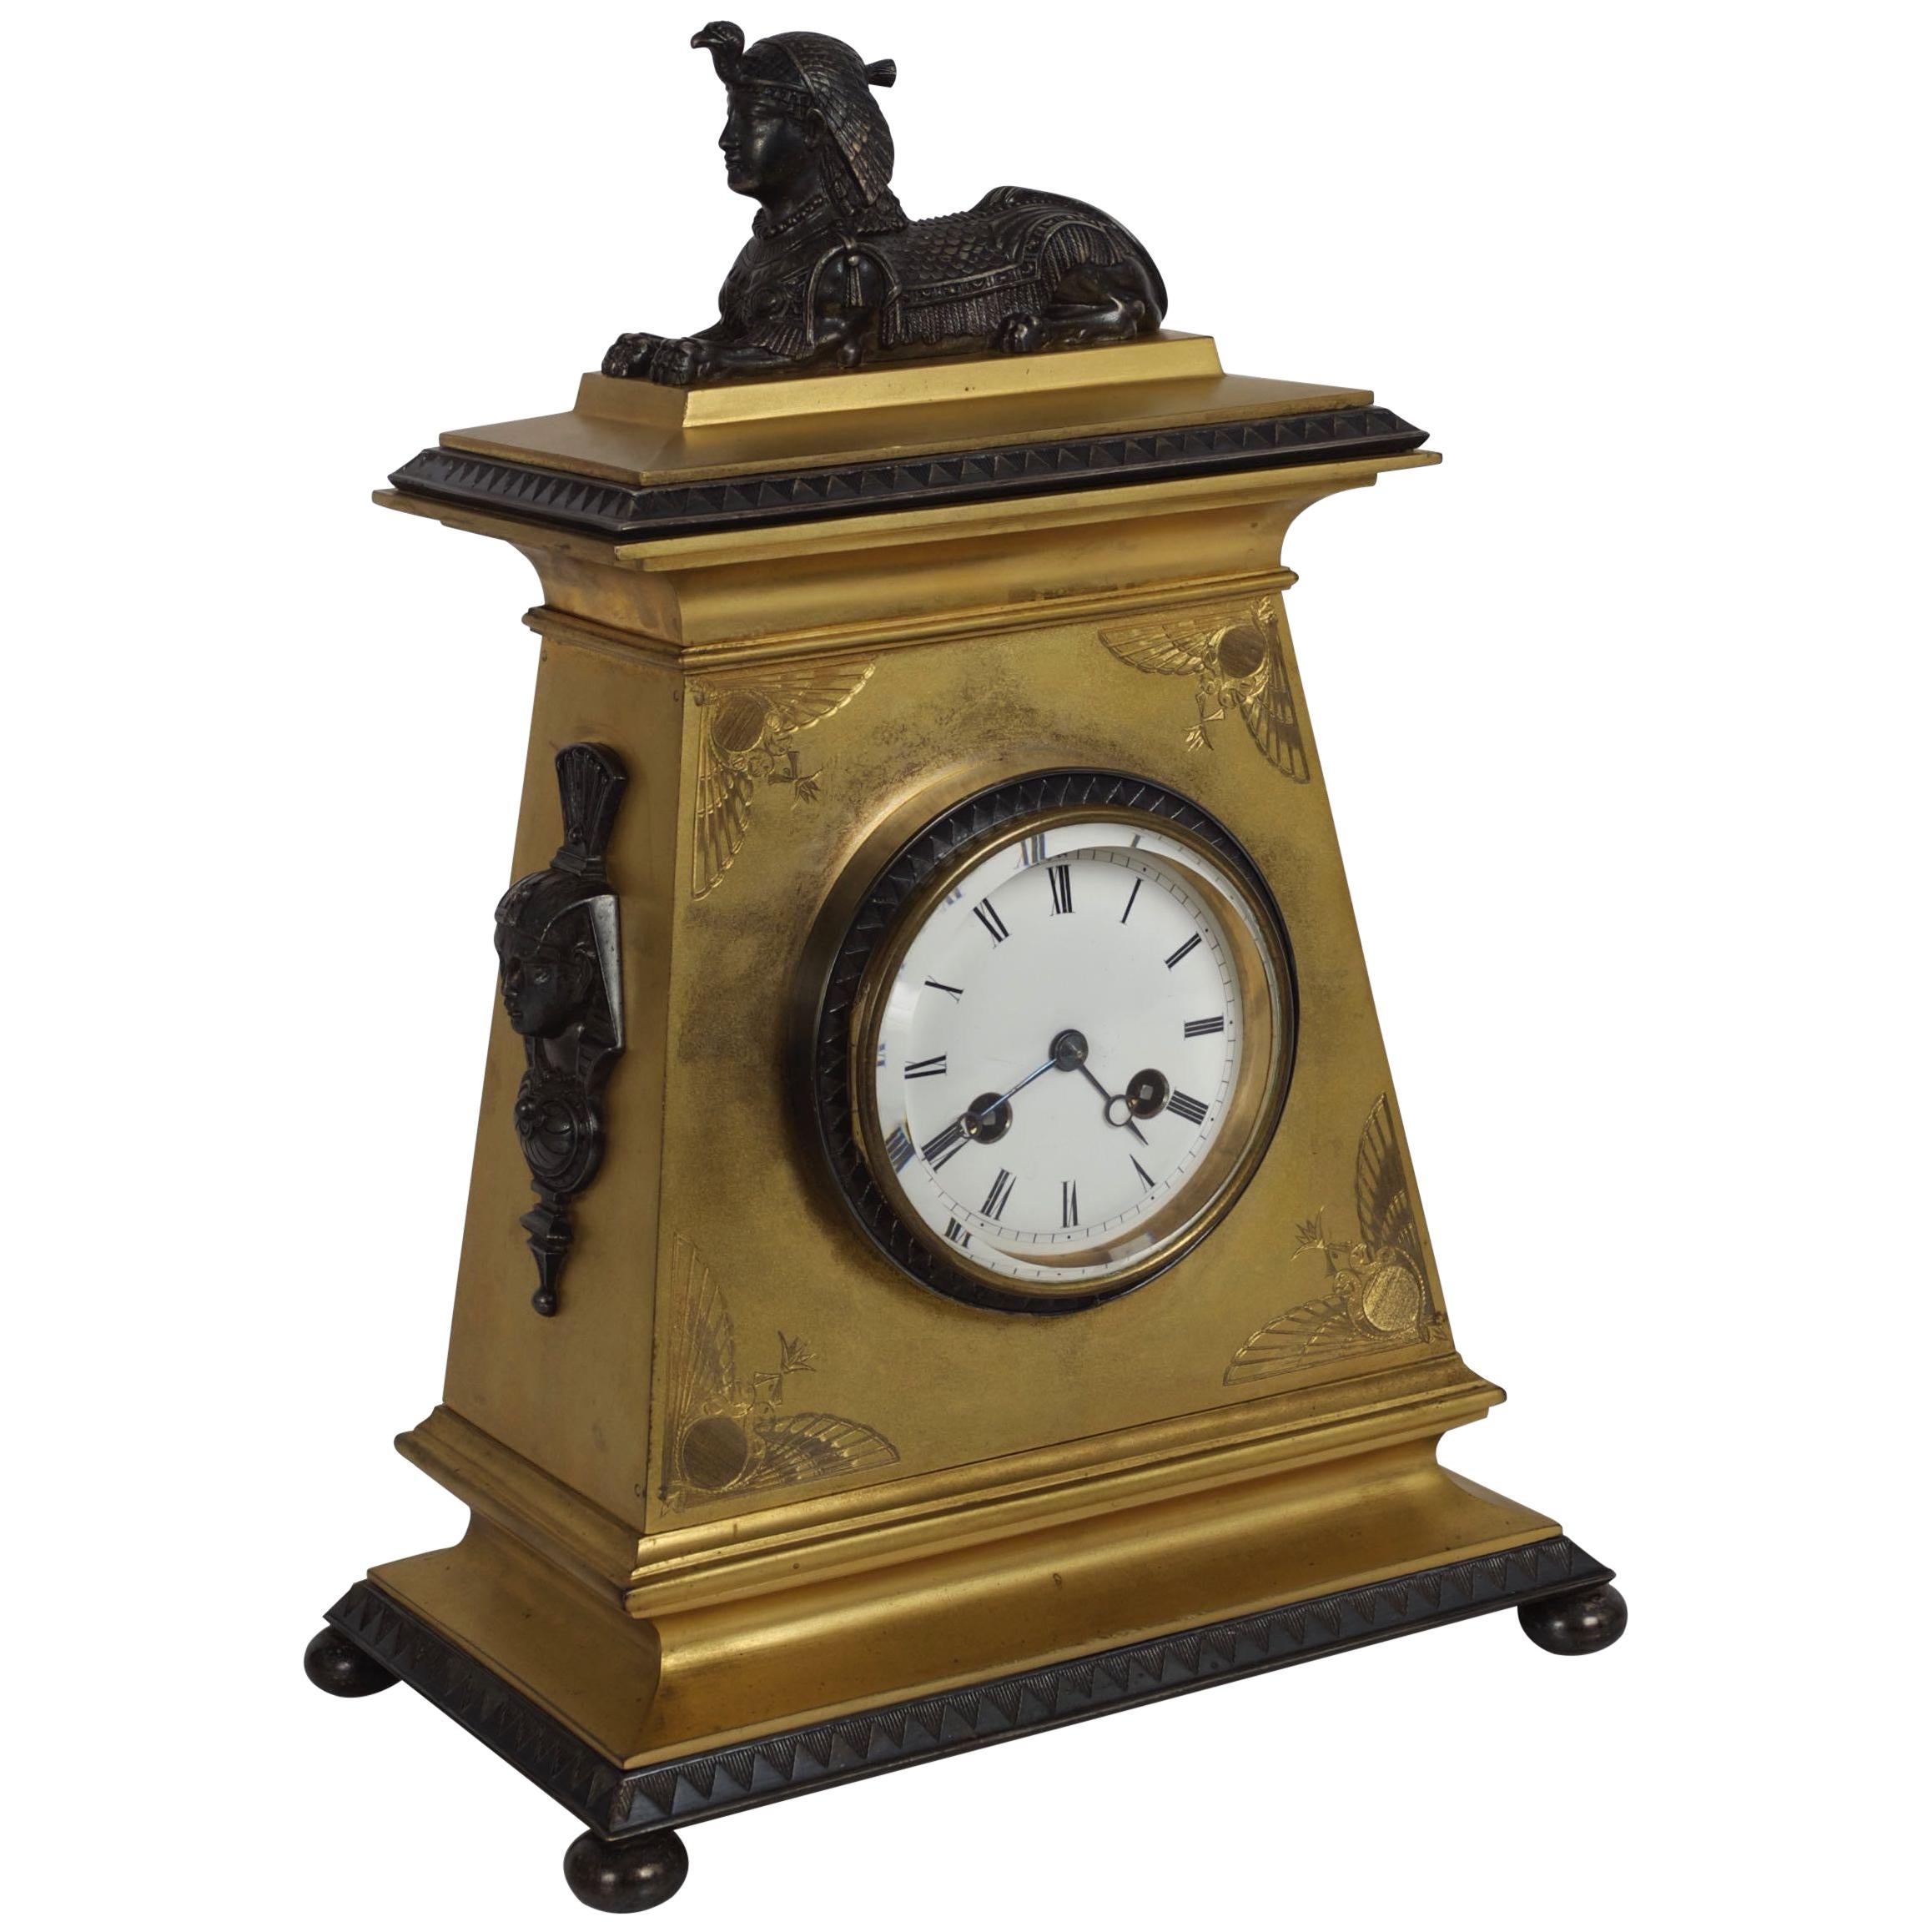 French Egyptian Revival Antique Bronze Mantel Clock with Sphinx, circa 1890